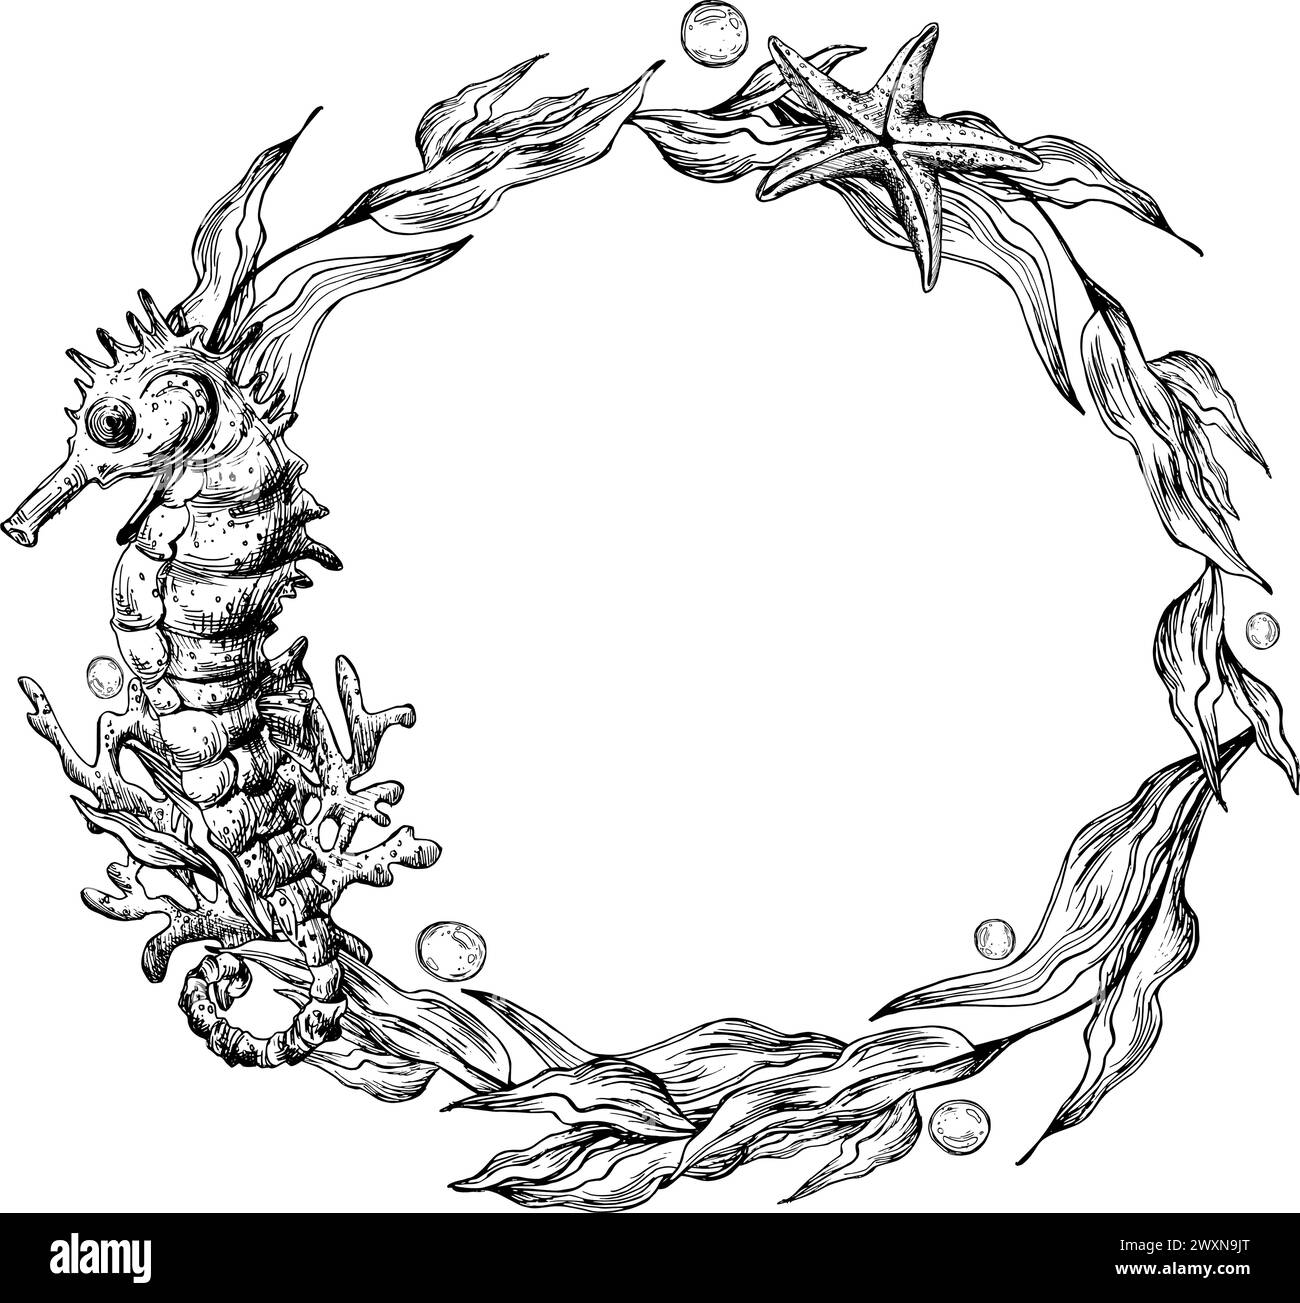 Underwater world clipart with sea animals seahorse, shells, coral and algae. Graphic illustration hand drawn in black ink. Circle wreath, frame EPS Stock Vector